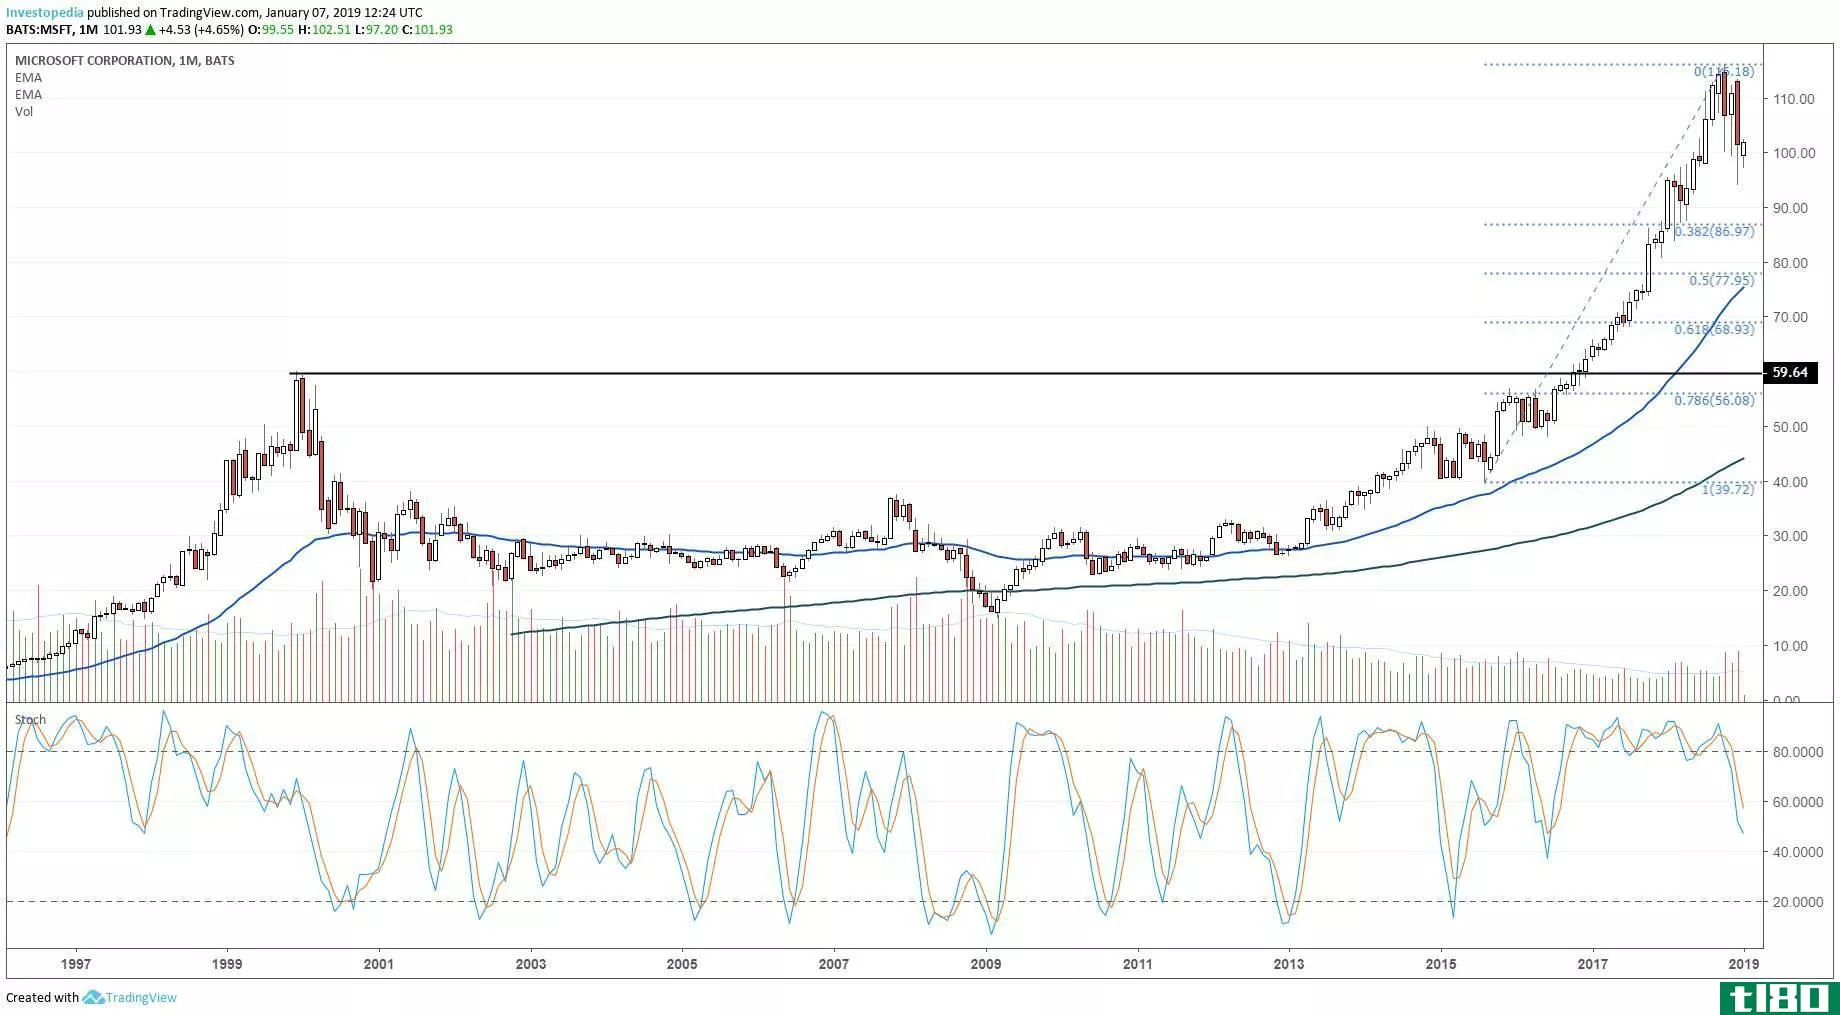 Long-term technical chart showing the share price performance of Microsoft Corporation (MSFT)